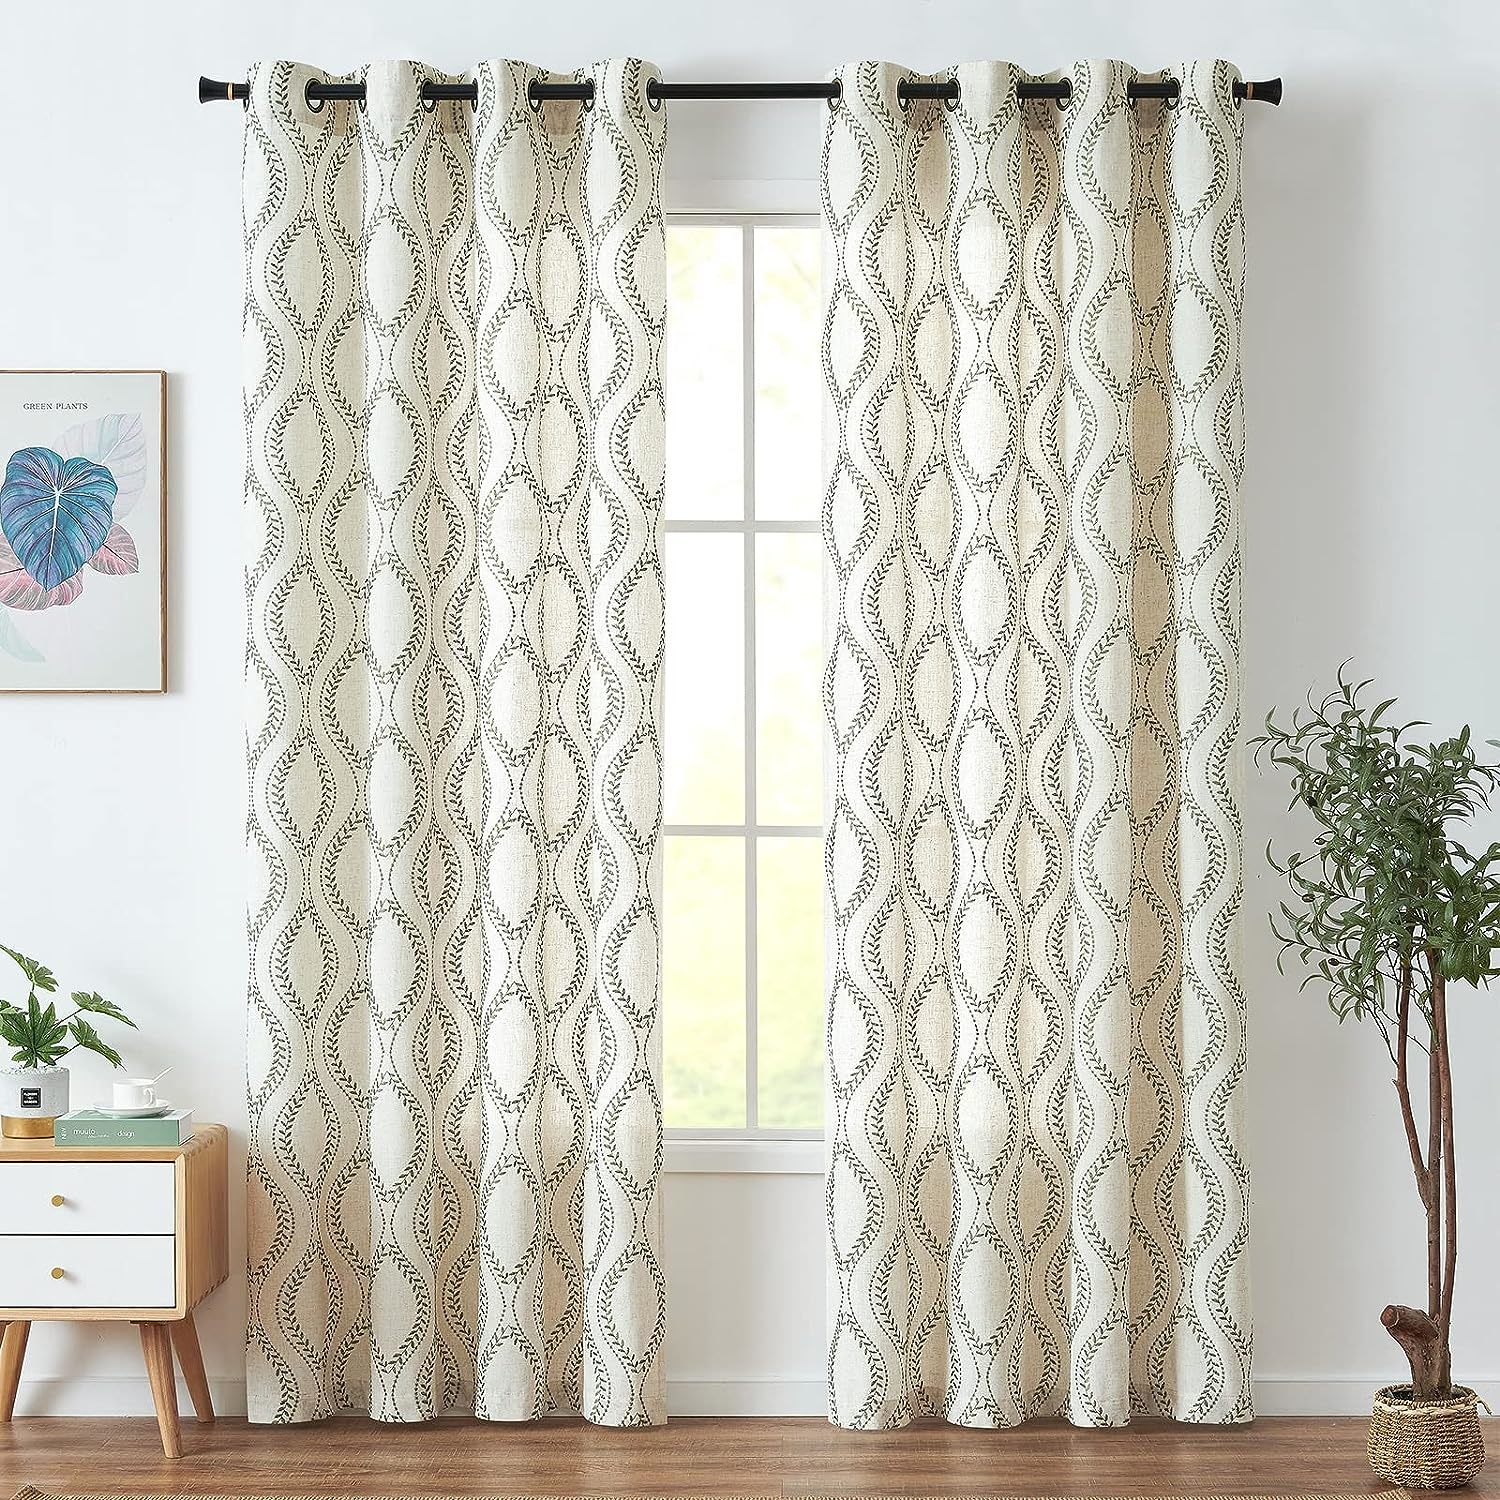 Ogee Geometry Drapes Light Filtering Grommet Country Curtain 2 Panels Green On - $56.94